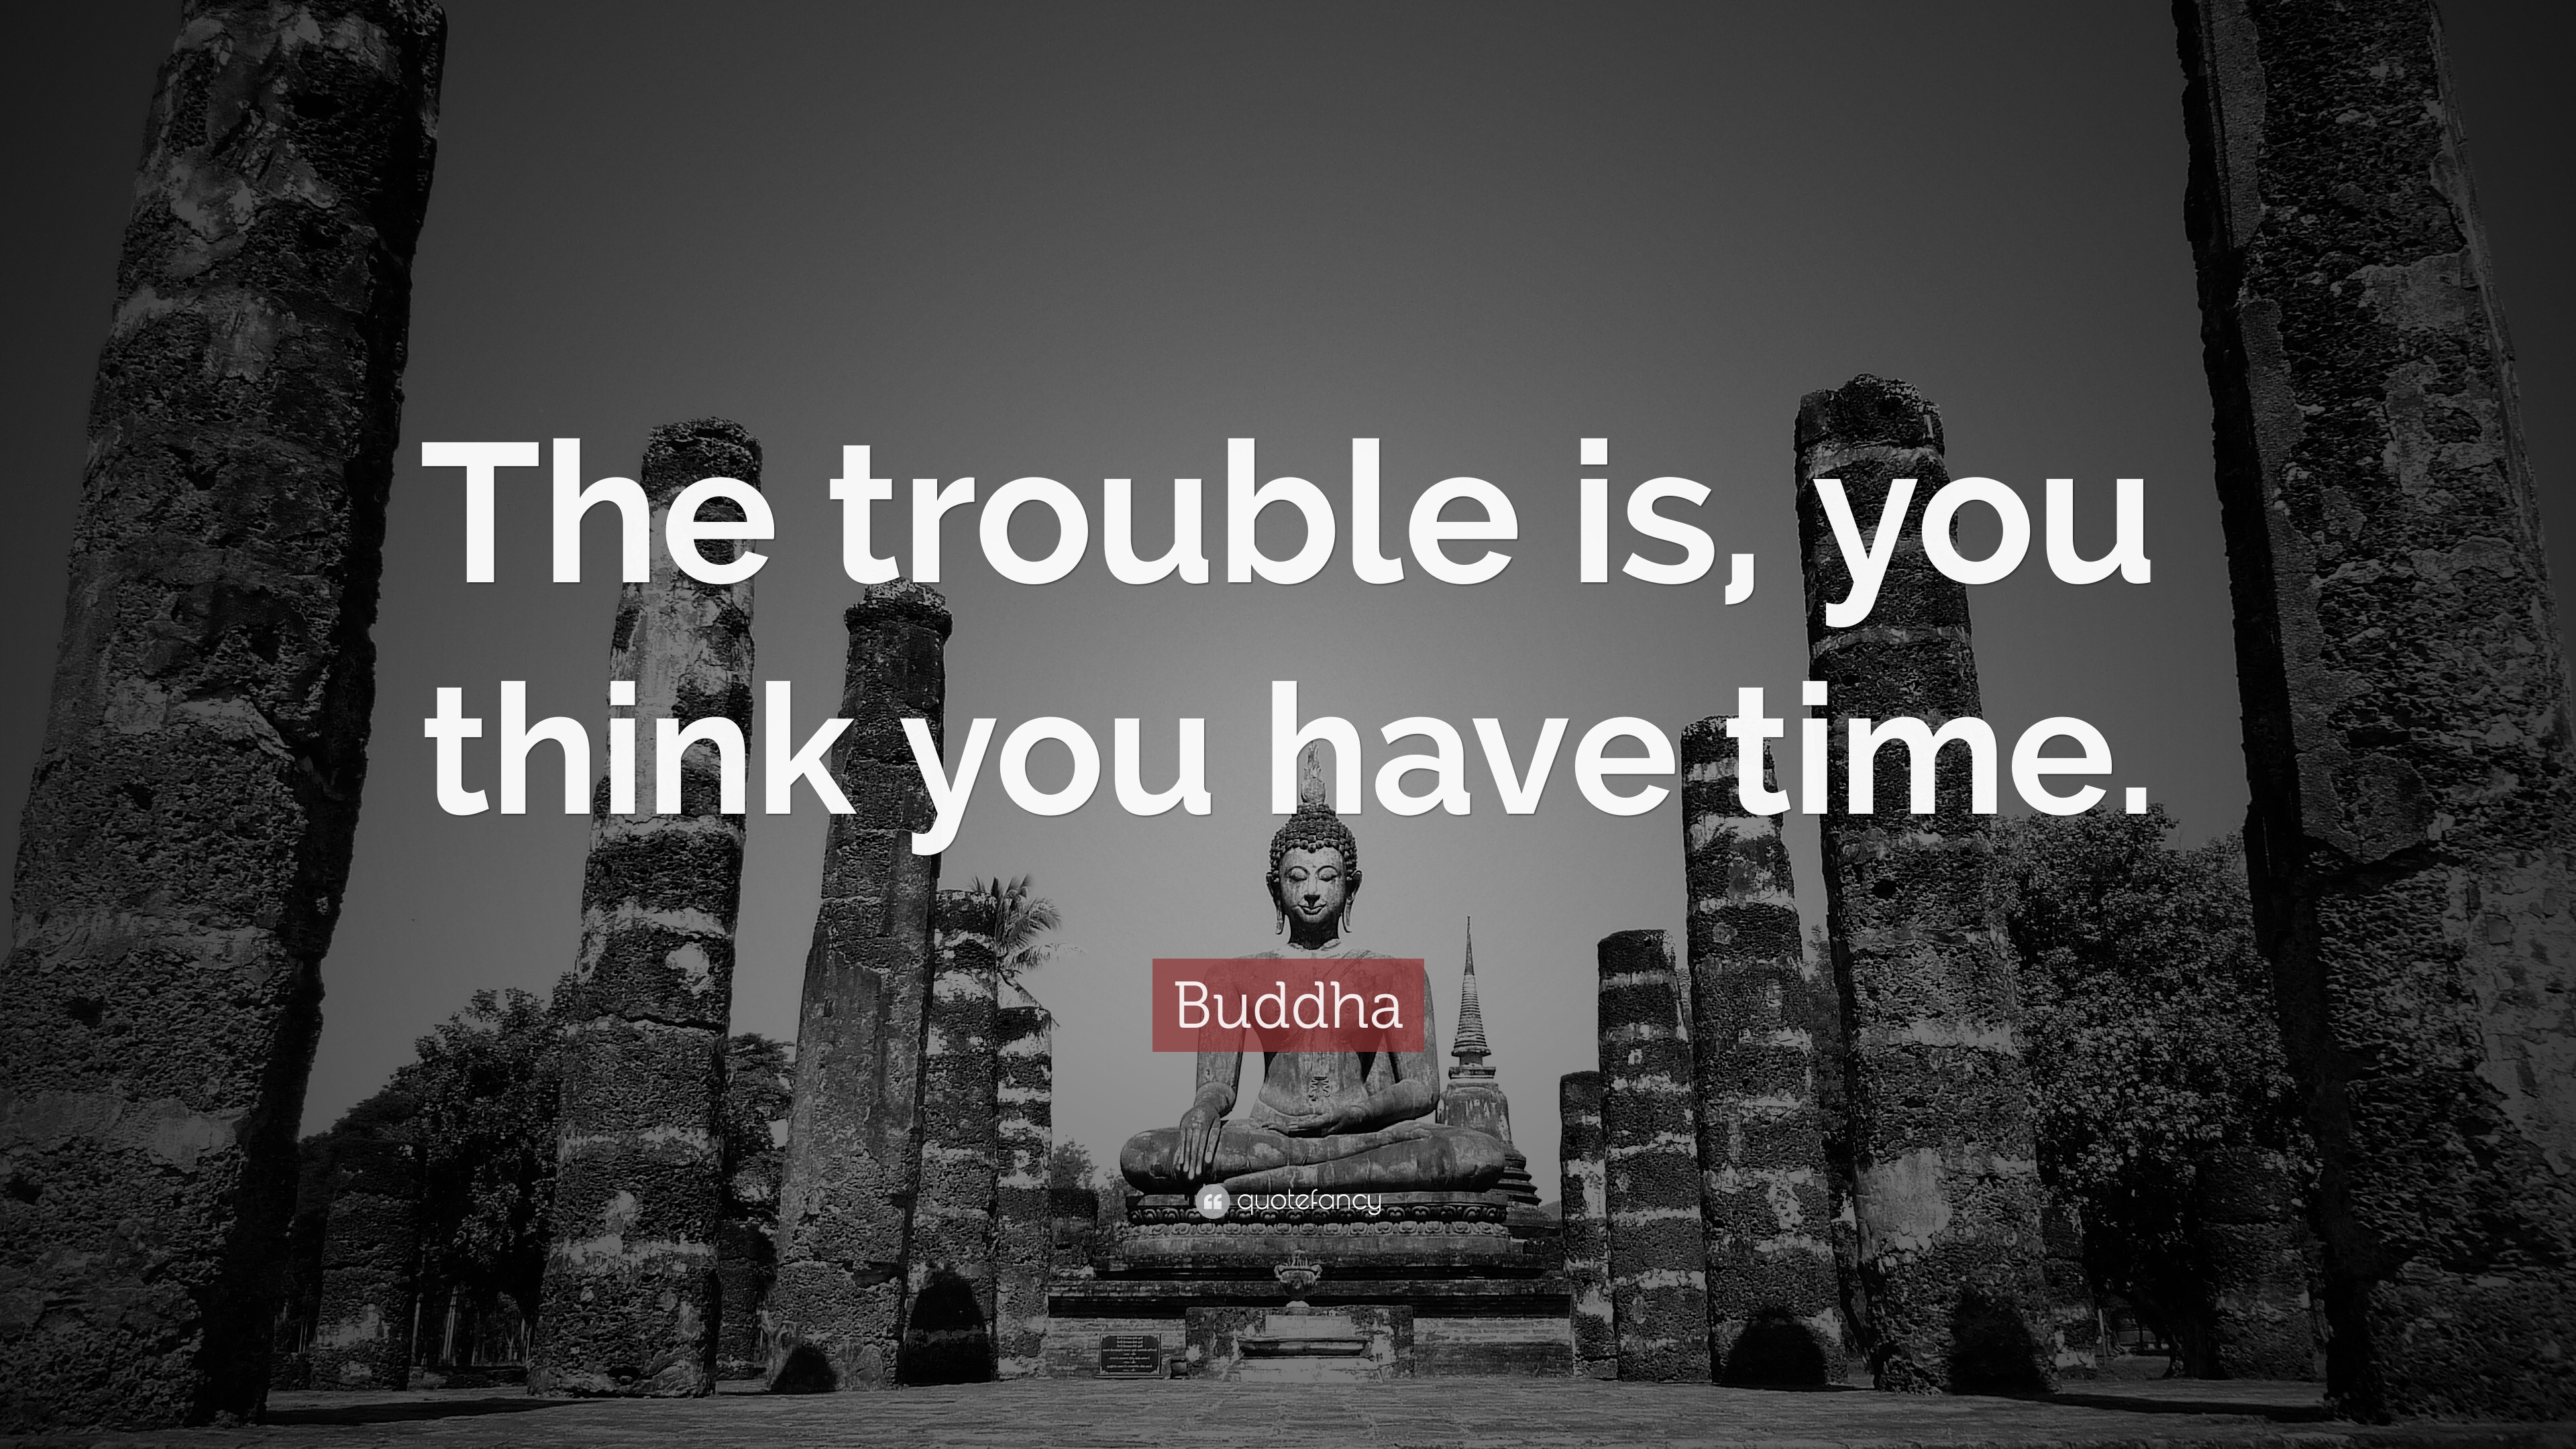 Buddha Quote: “The trouble is, you think you have time.”